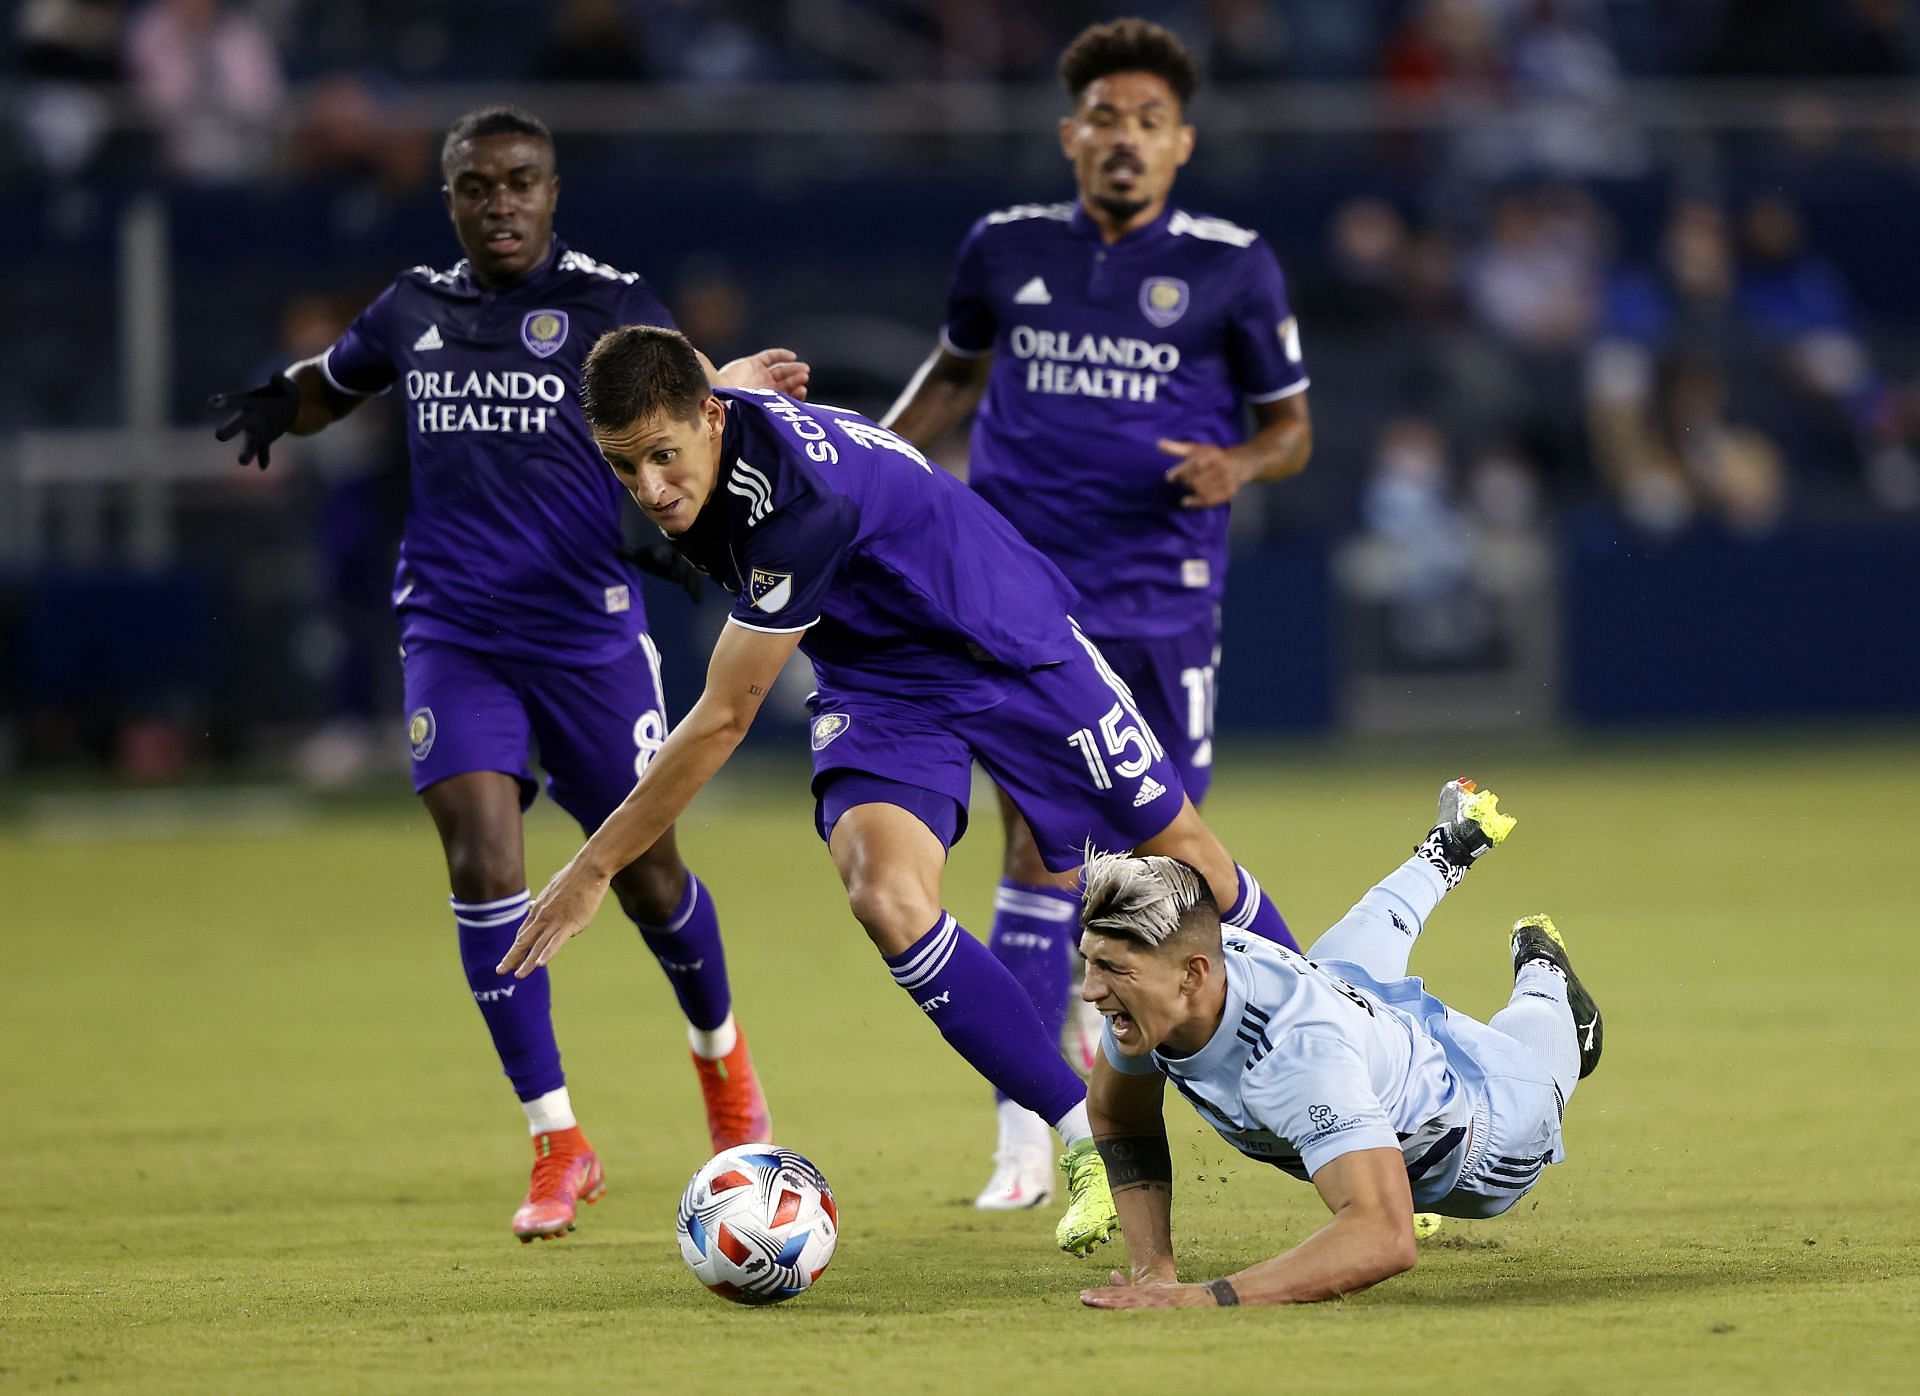 Orlando City kick off their MLS 2022 campaign against Montreal on Sunday